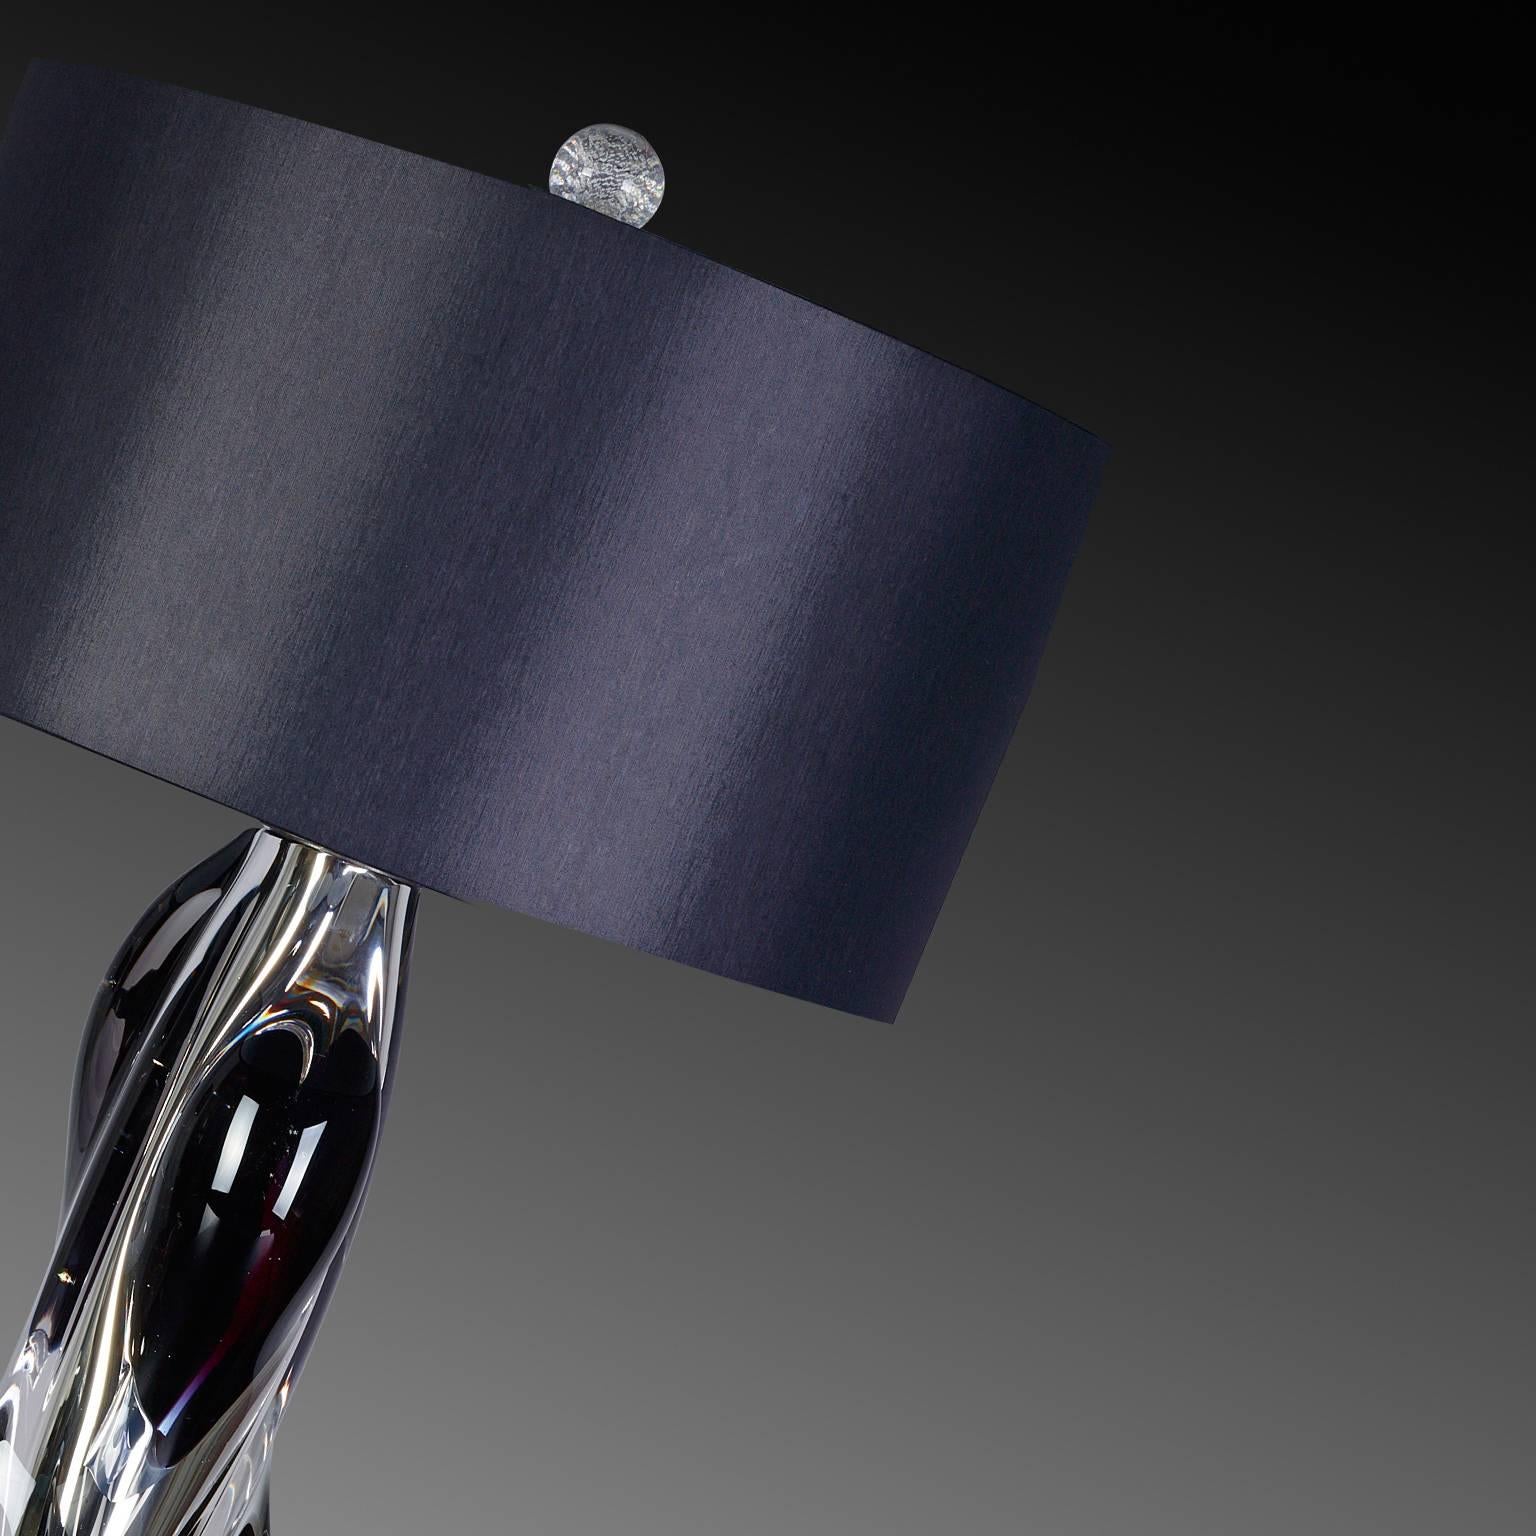 Barena Murano glass table lamp by Seguso Vetri d’Arte. Handmade, blown Murano glass lamp with a sculptural and organic shape. The lamp's clear and mirrored glass is accented by small inclusions of black glass, which give the lamp a modern and unique